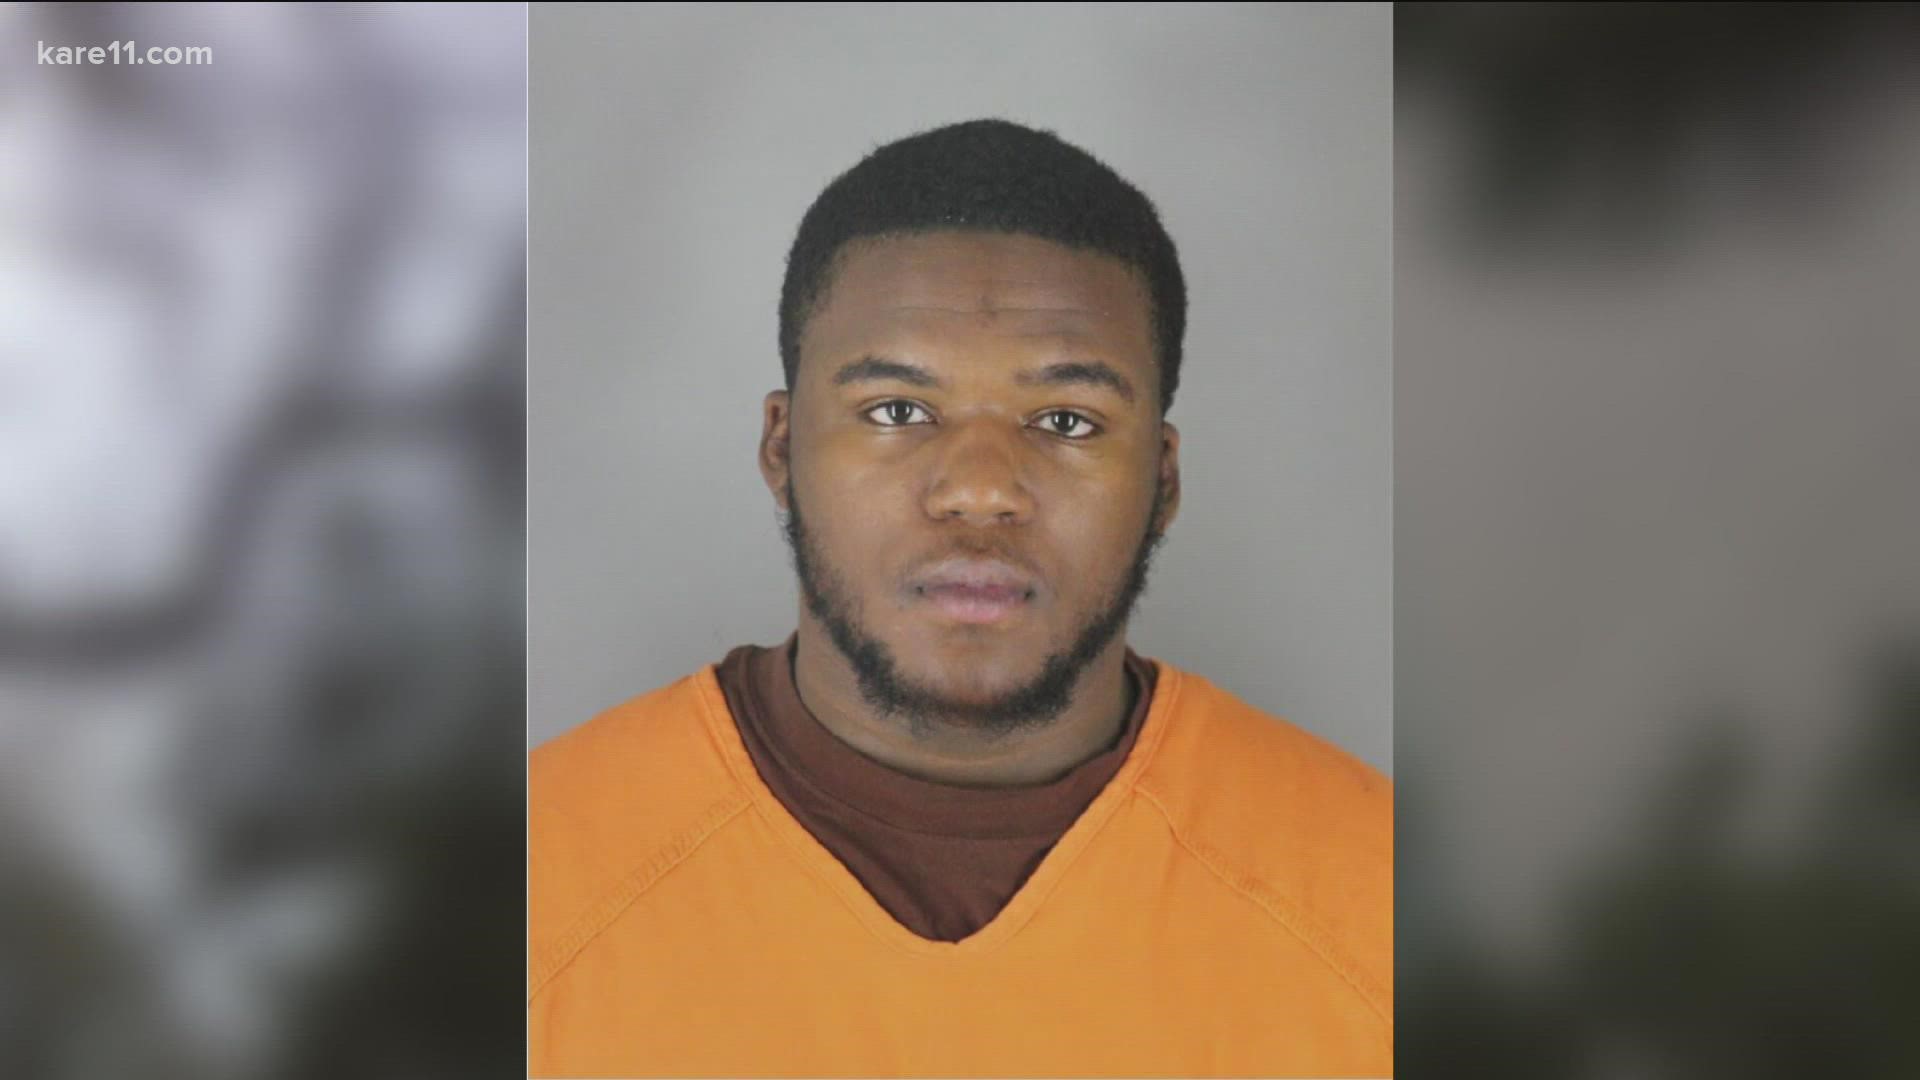 Dennis Huff, 18, is charged with carjacking a marked city vehicle this week. Just a year ago, he committed a series of armed robberies and carjackings.